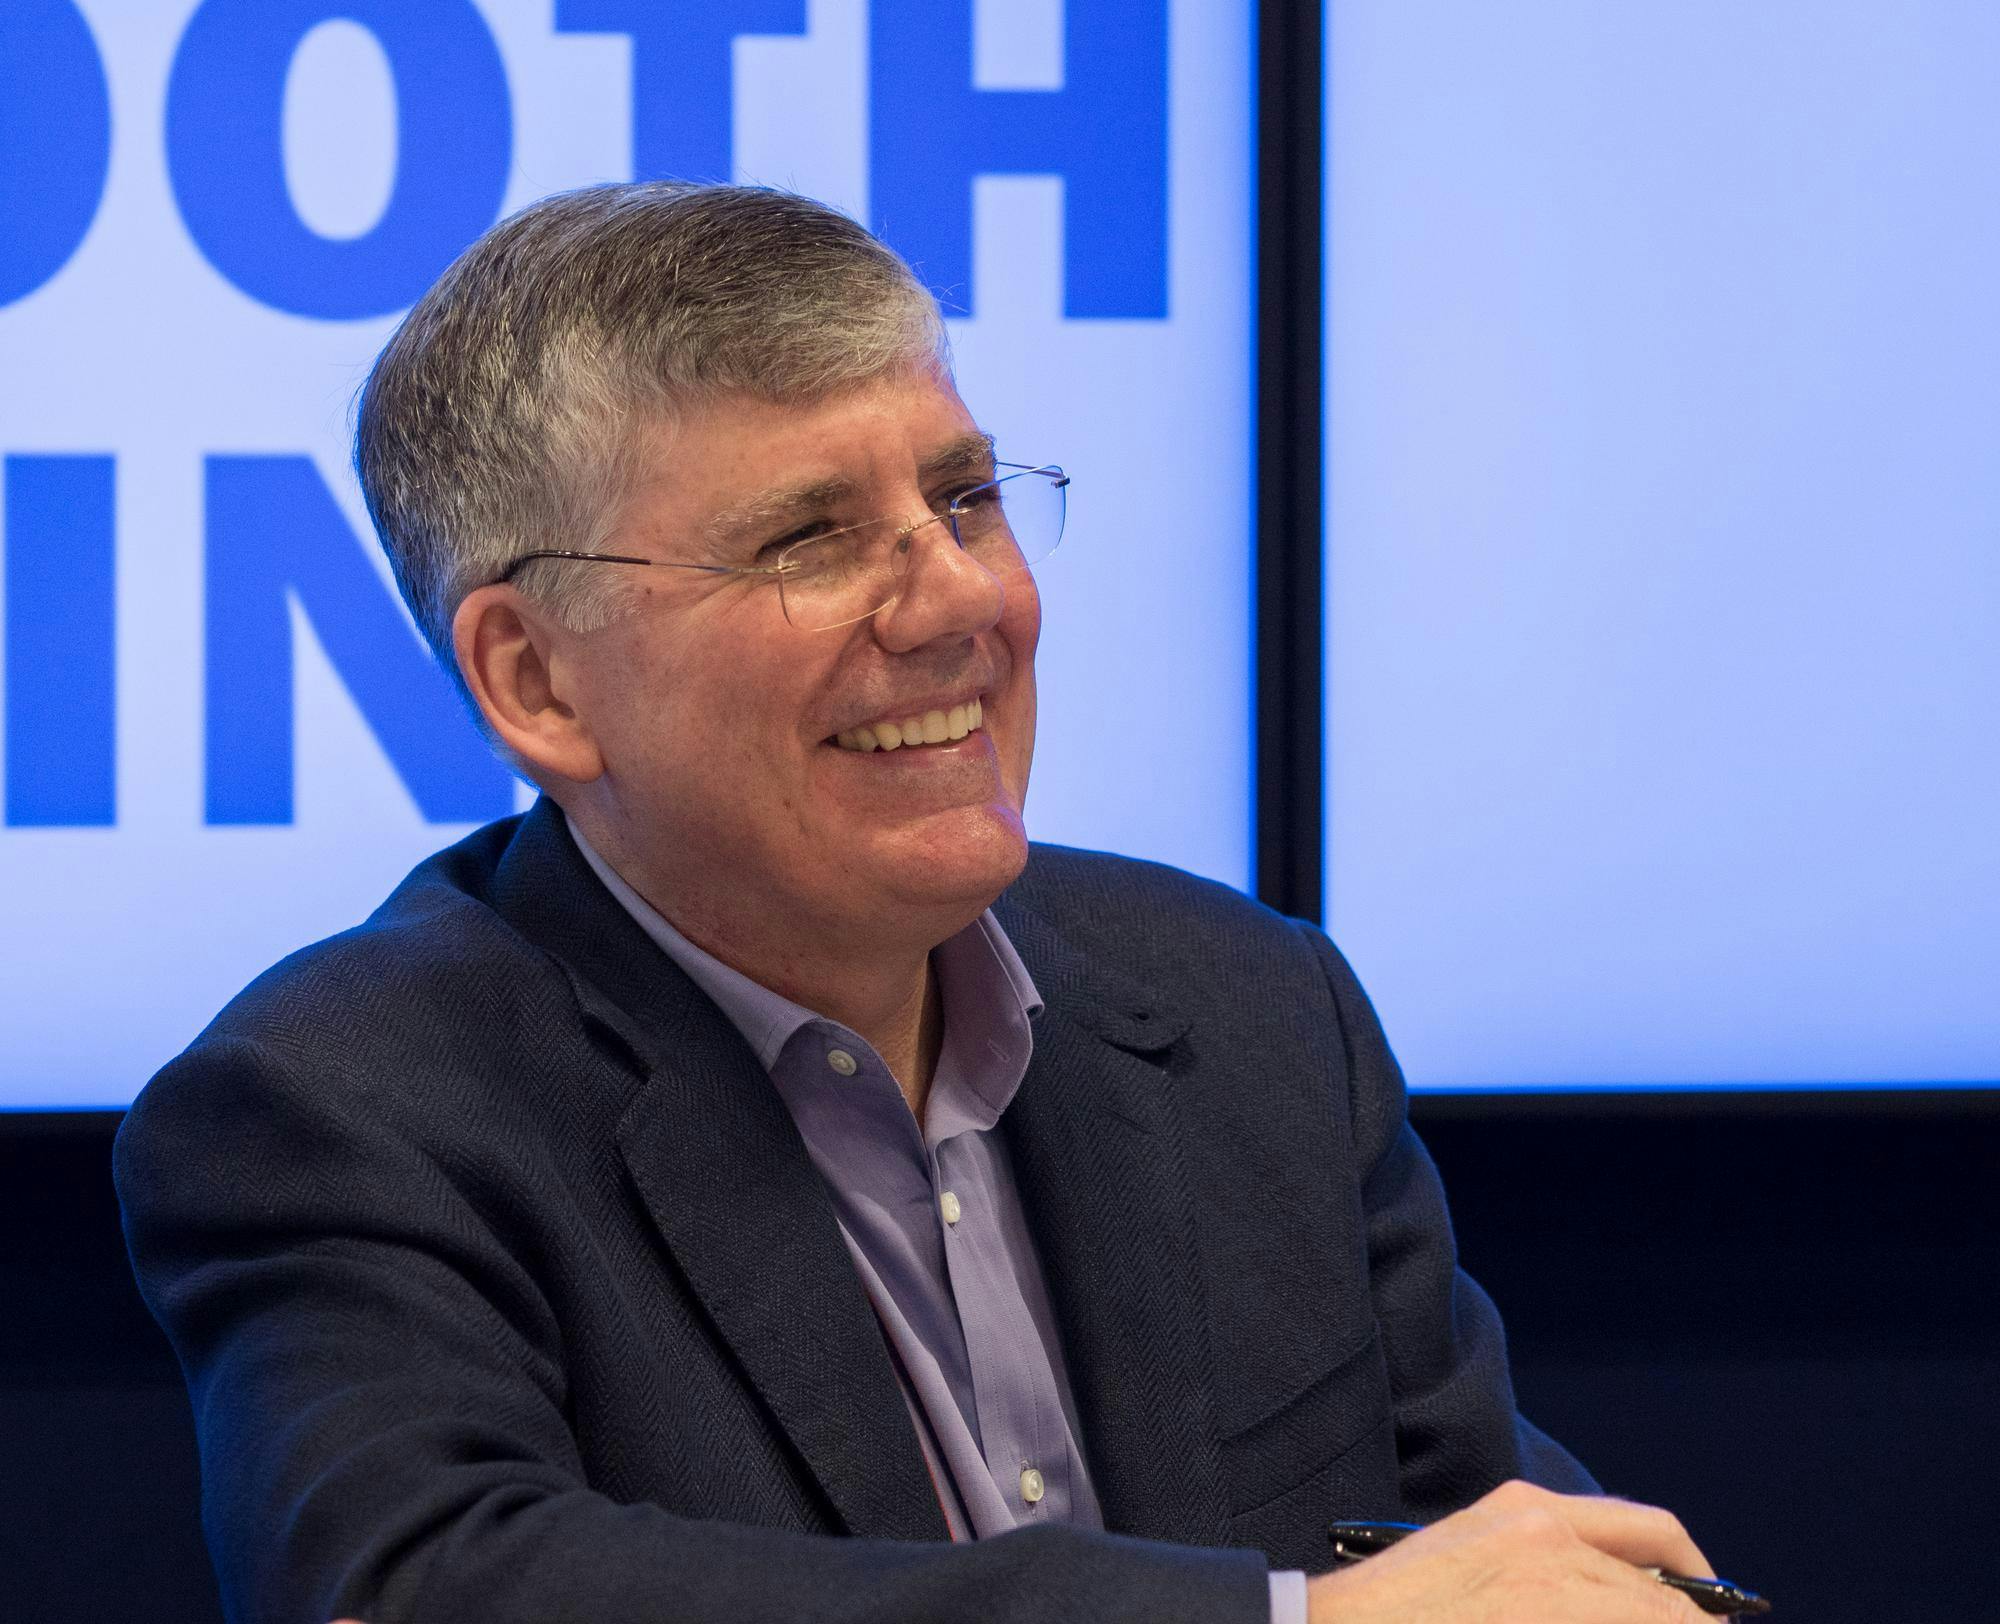 Rick Riordan is pictured at the Javits Convention Center in New York City in 2018.